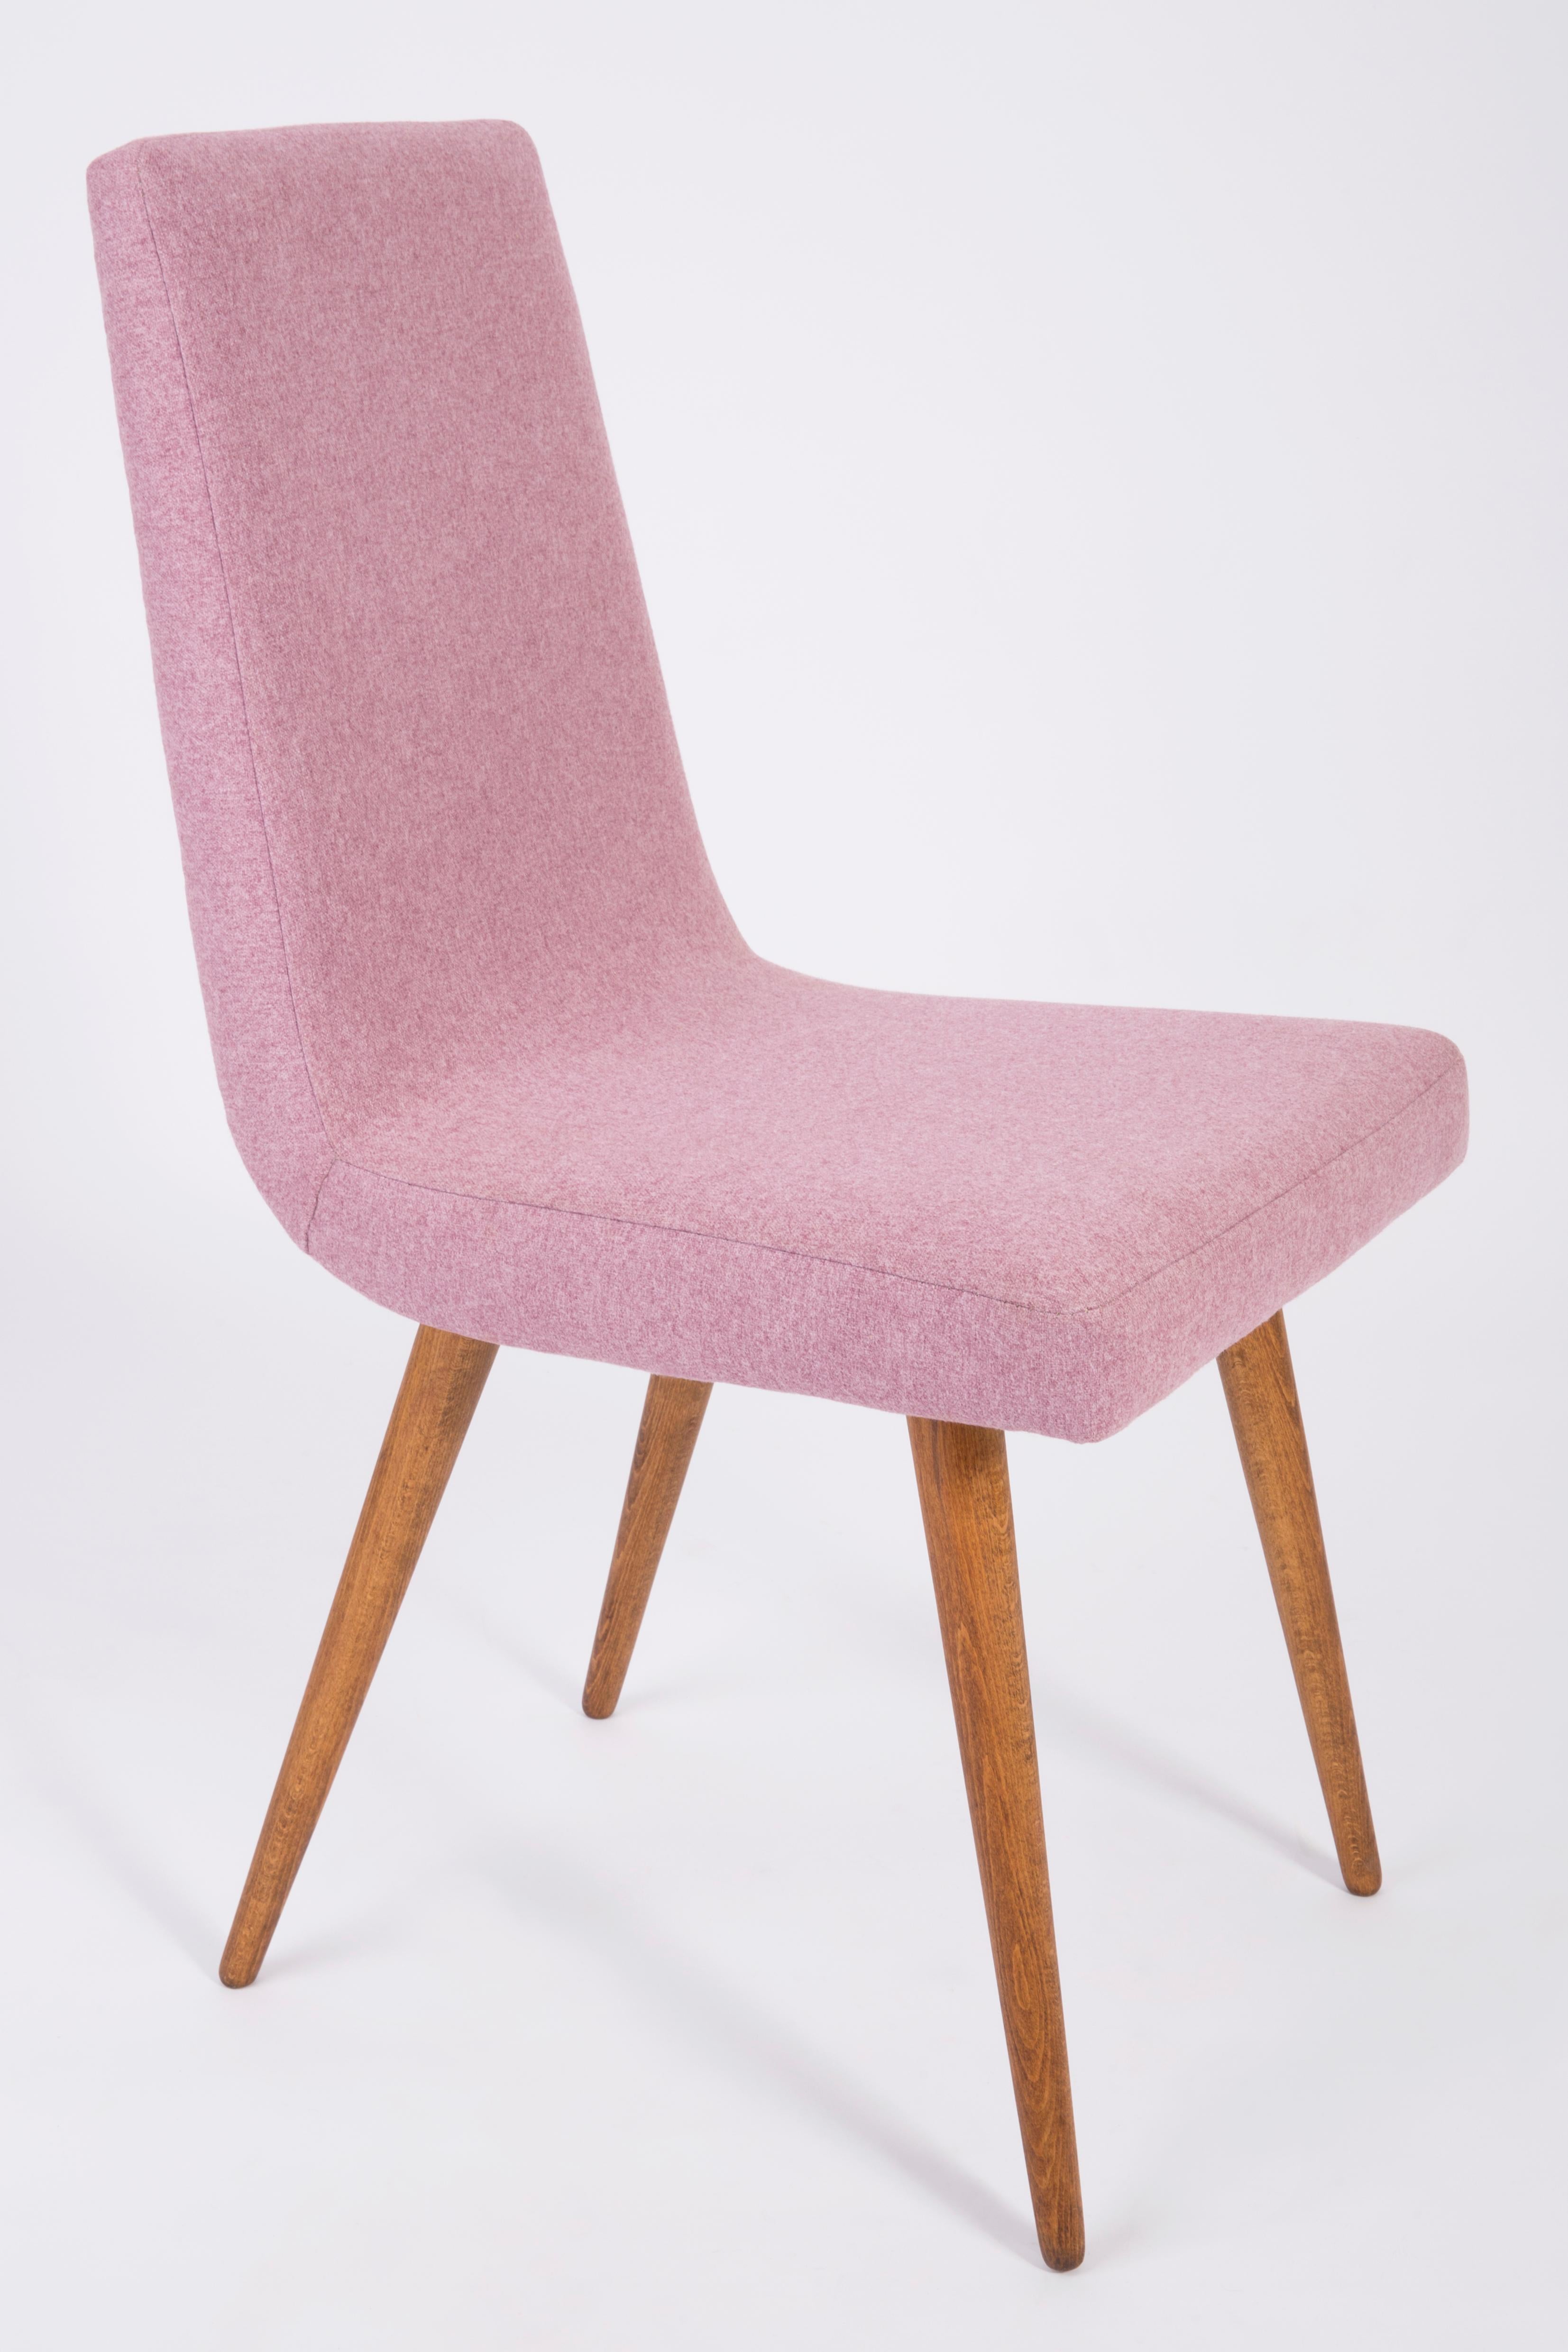 Set of Two 20th Century Pink Mélange Rajmund Halas Chairs, 1960s For Sale 1